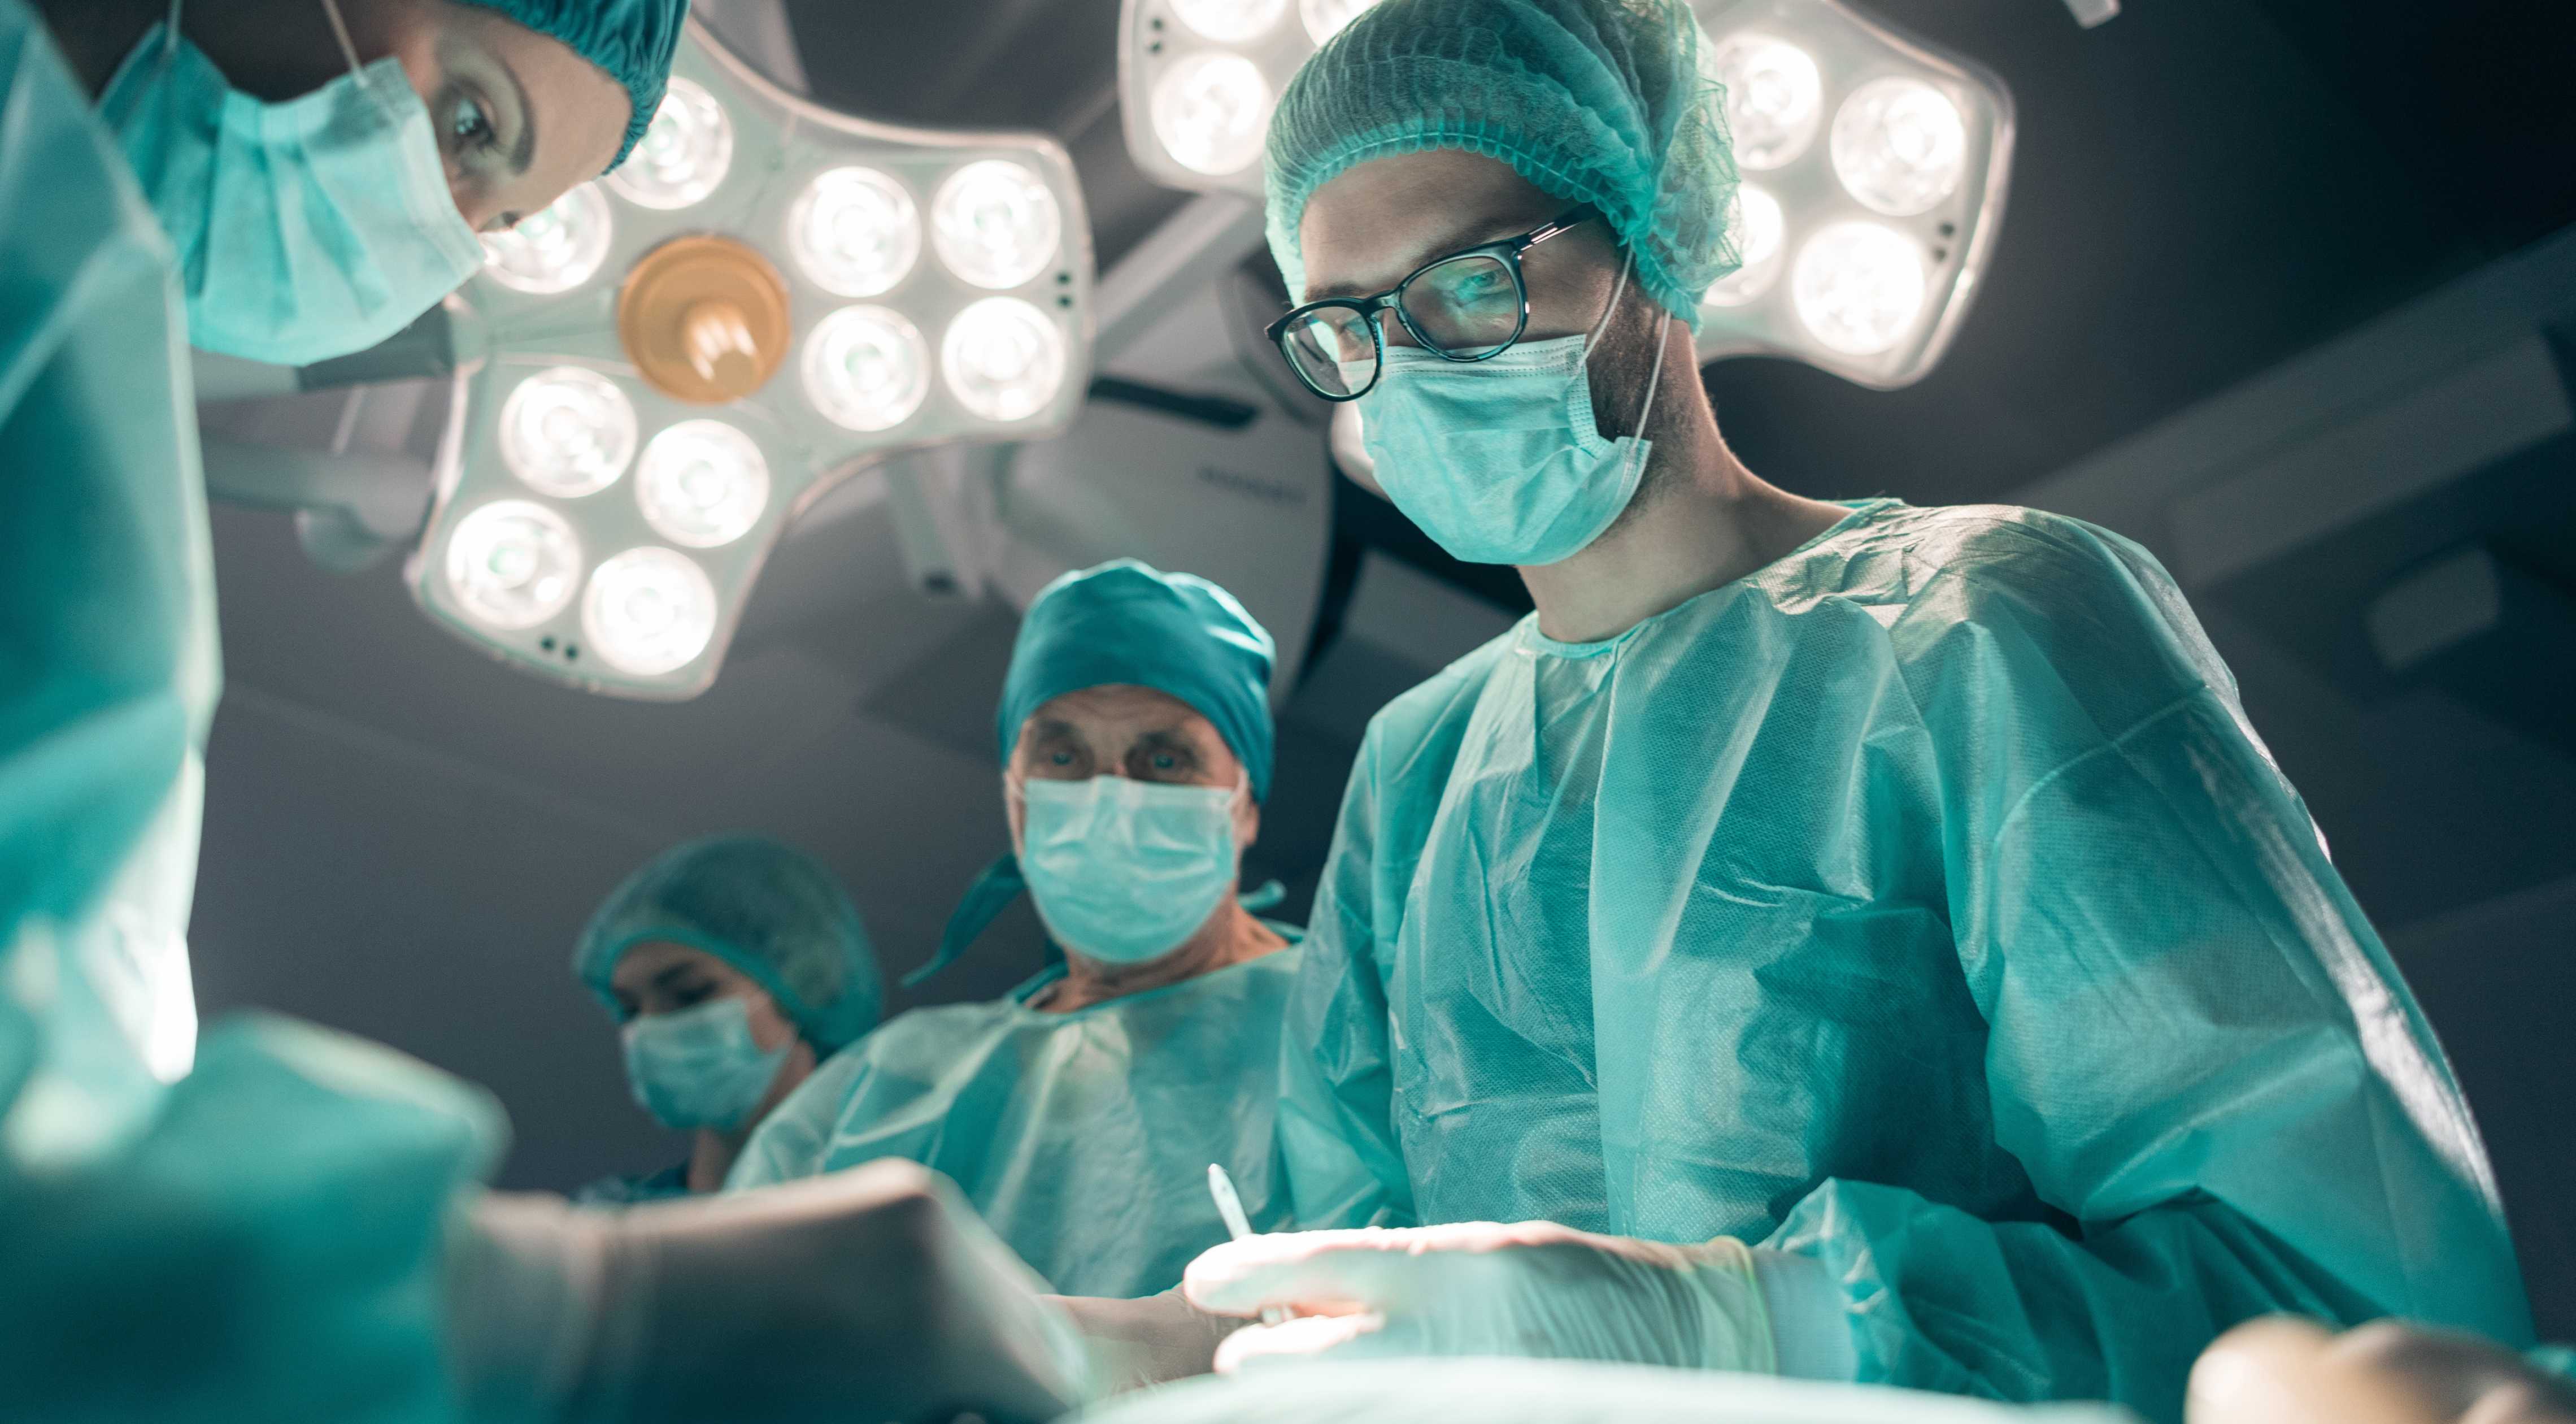 Cover of UX design case study showing surgeons in the operating room with lights overhead.